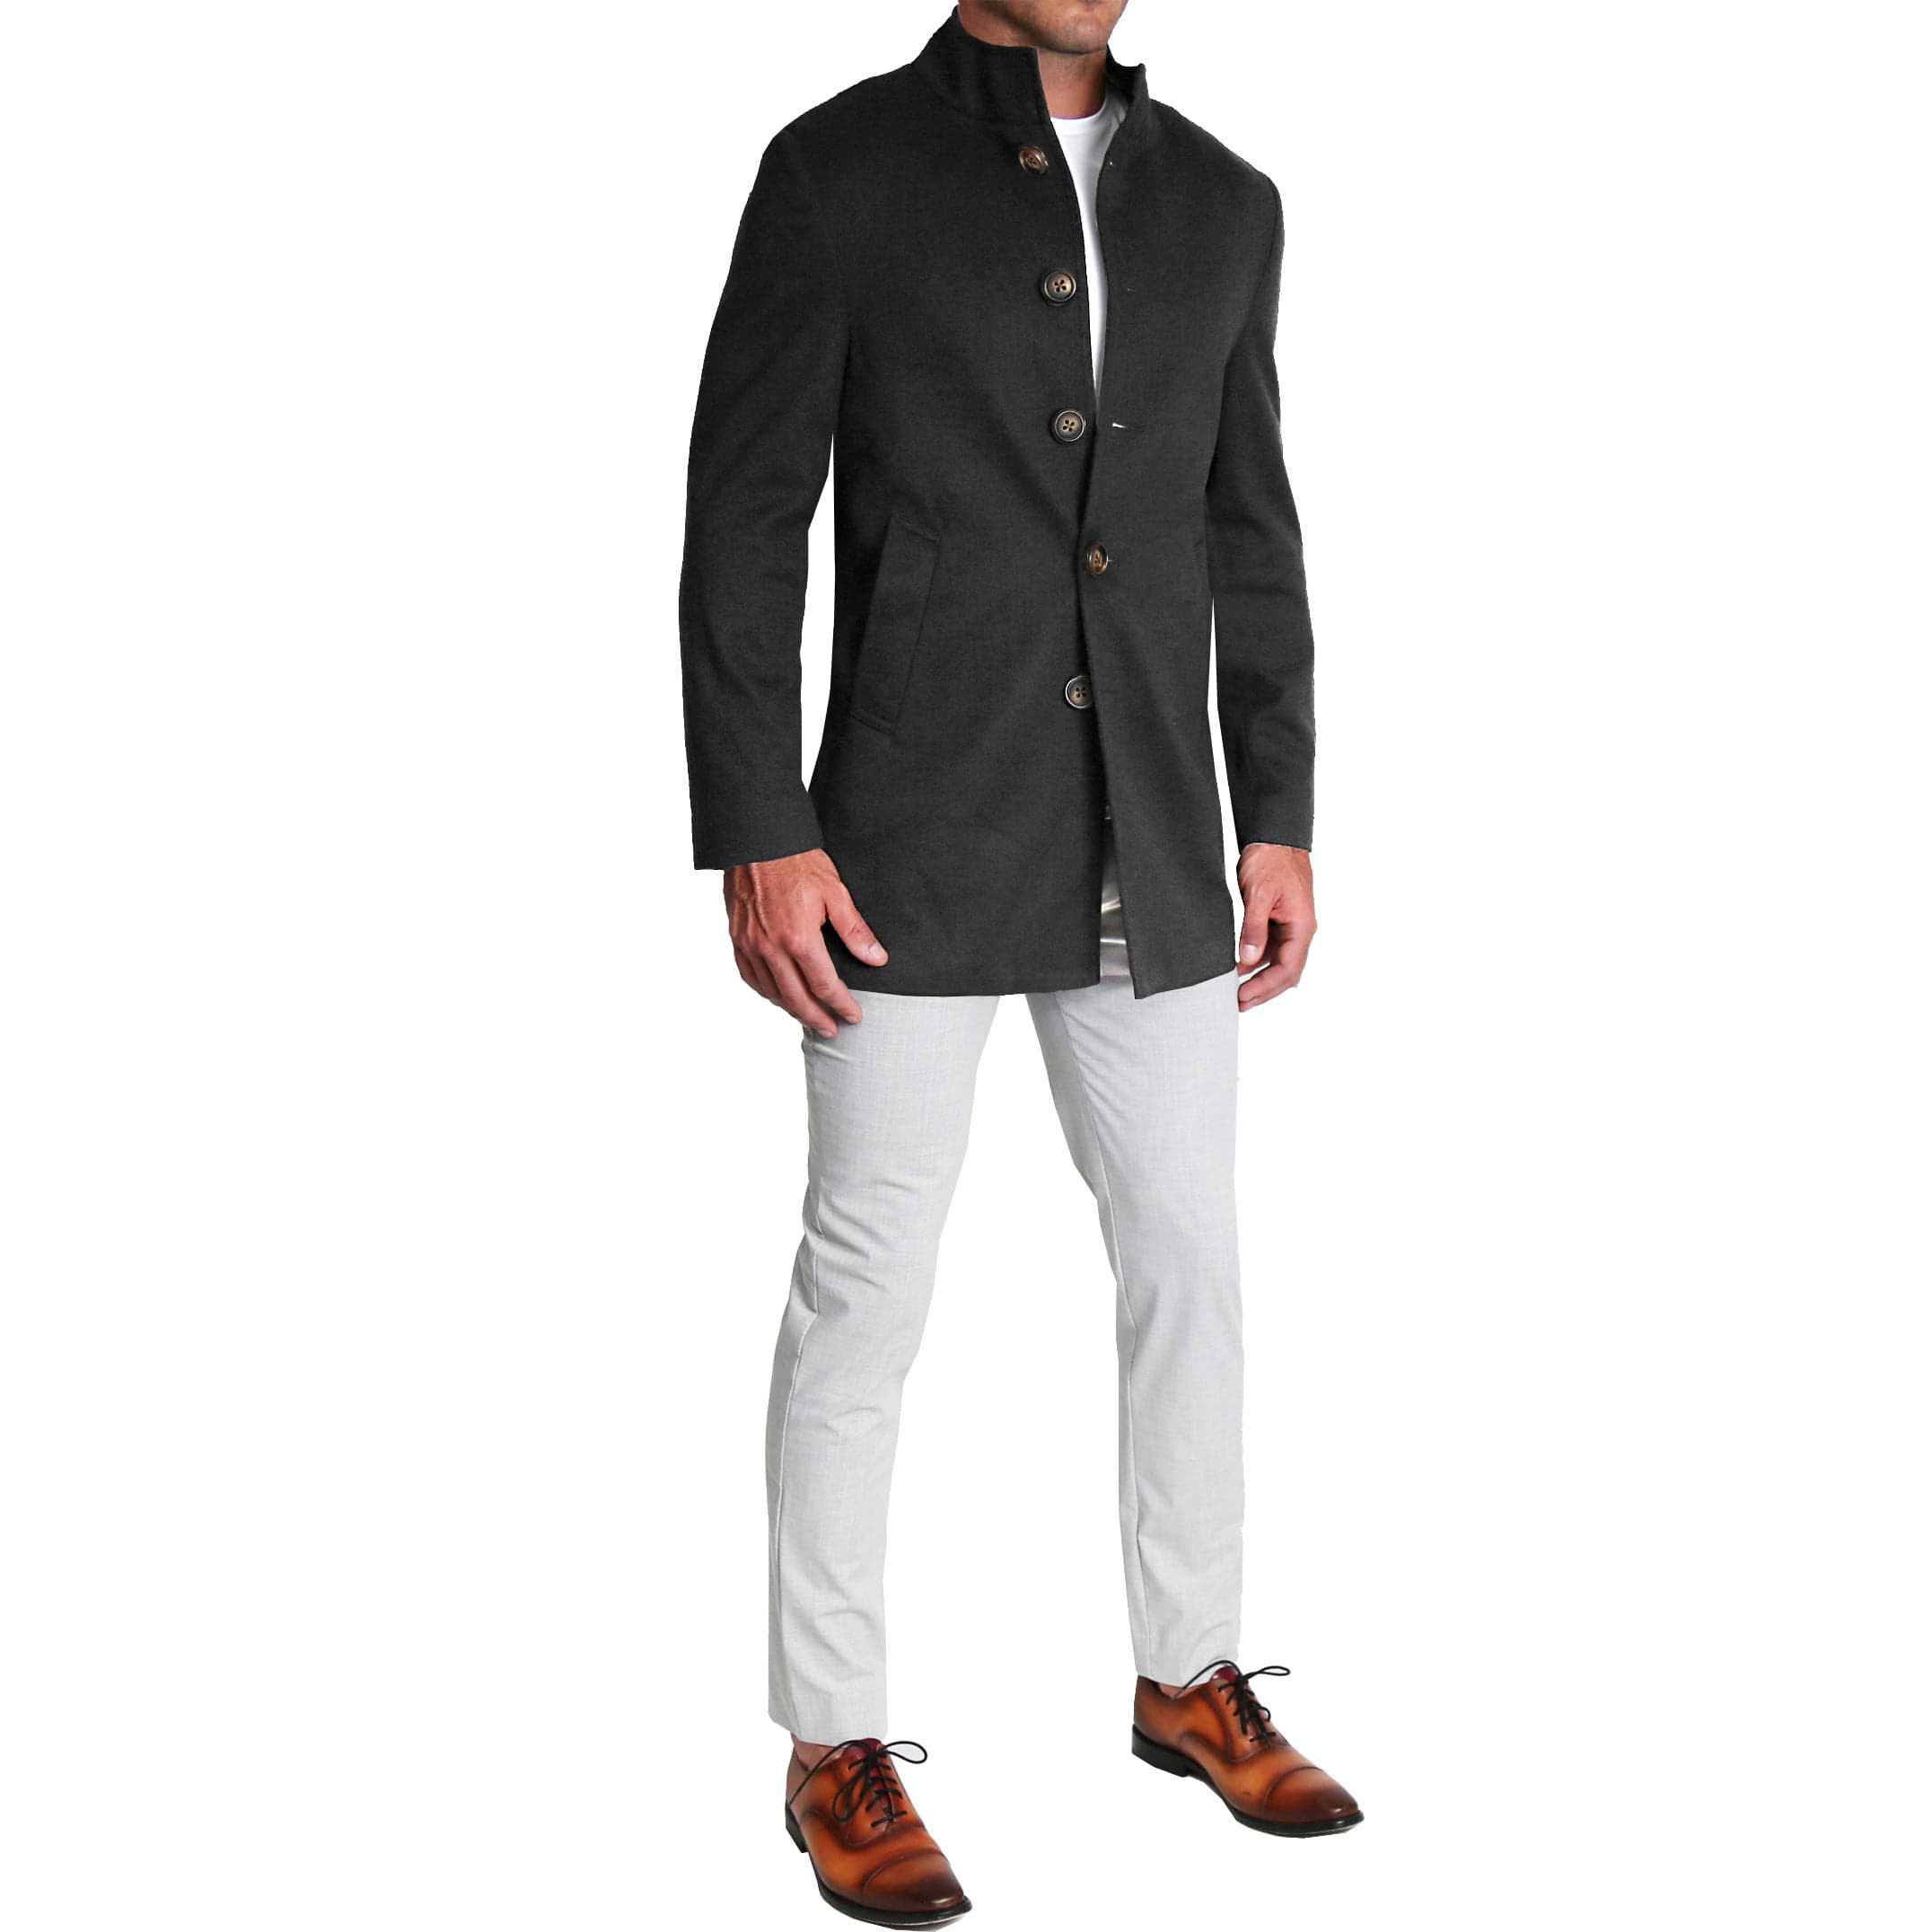 Solid Black Open Button Overcoat